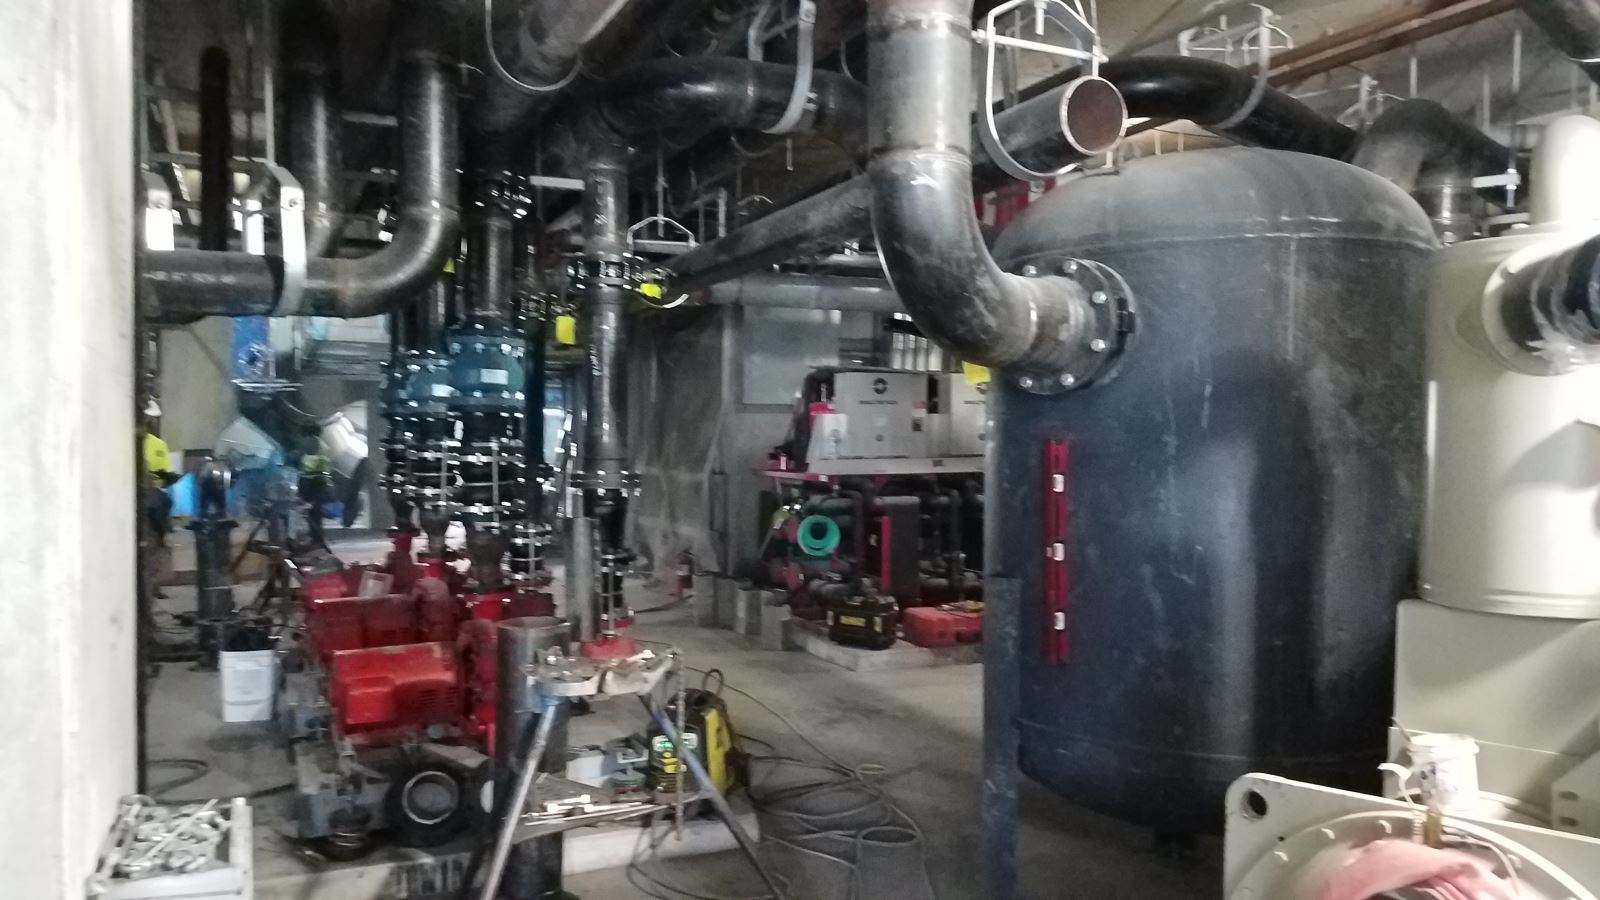 View of ongoing equipment installation in pool mechanical room